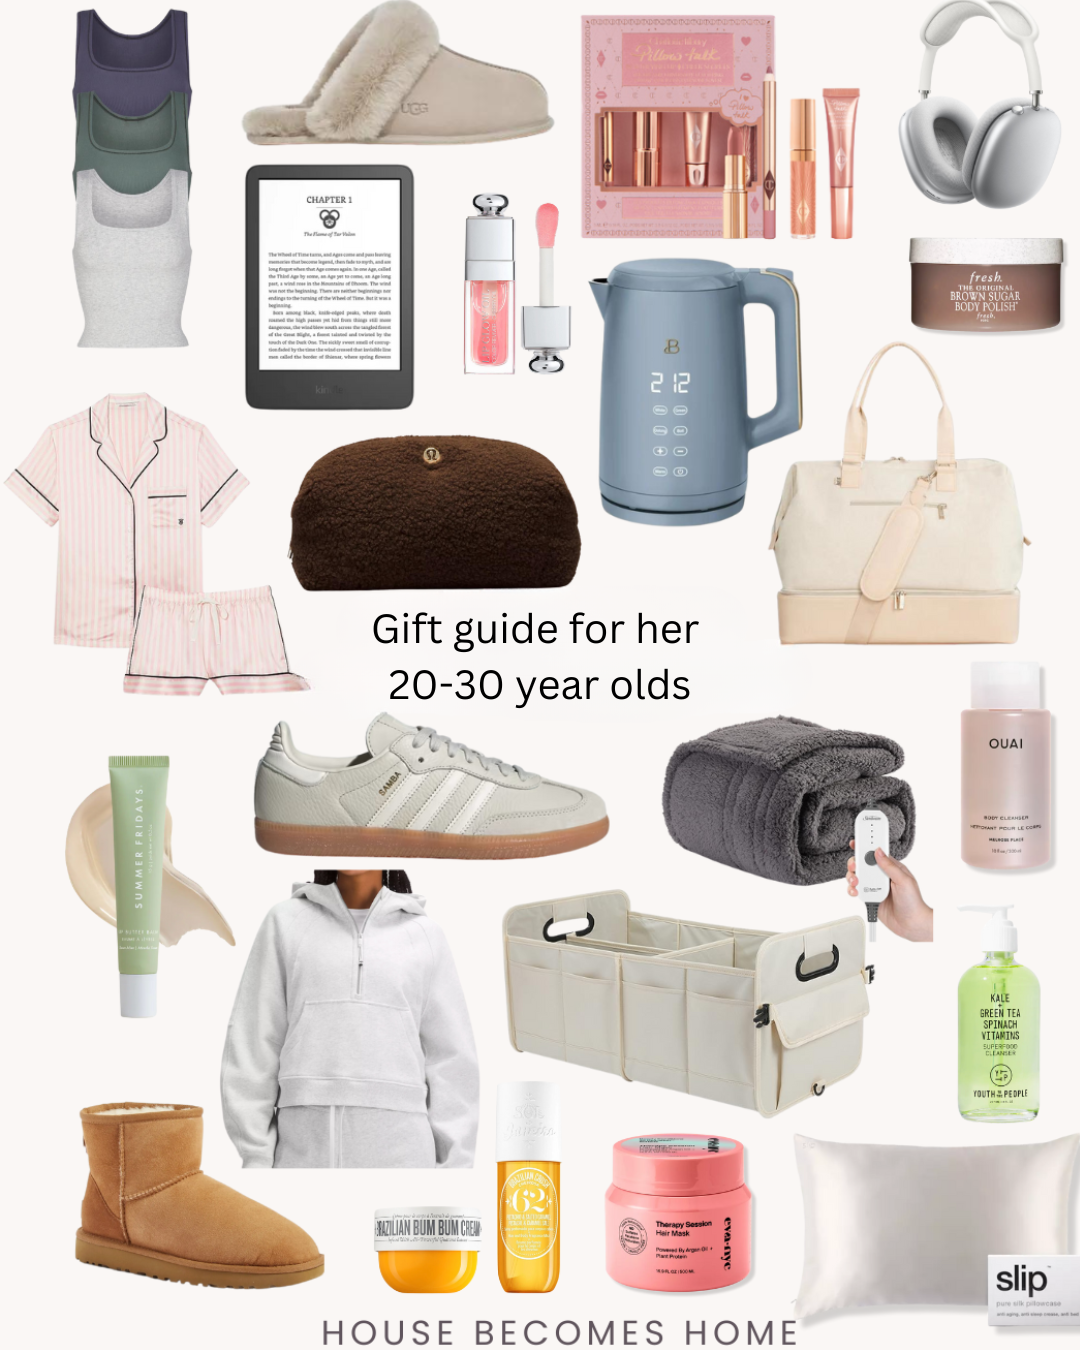 Christmas gift ideas for women - Chic at any age